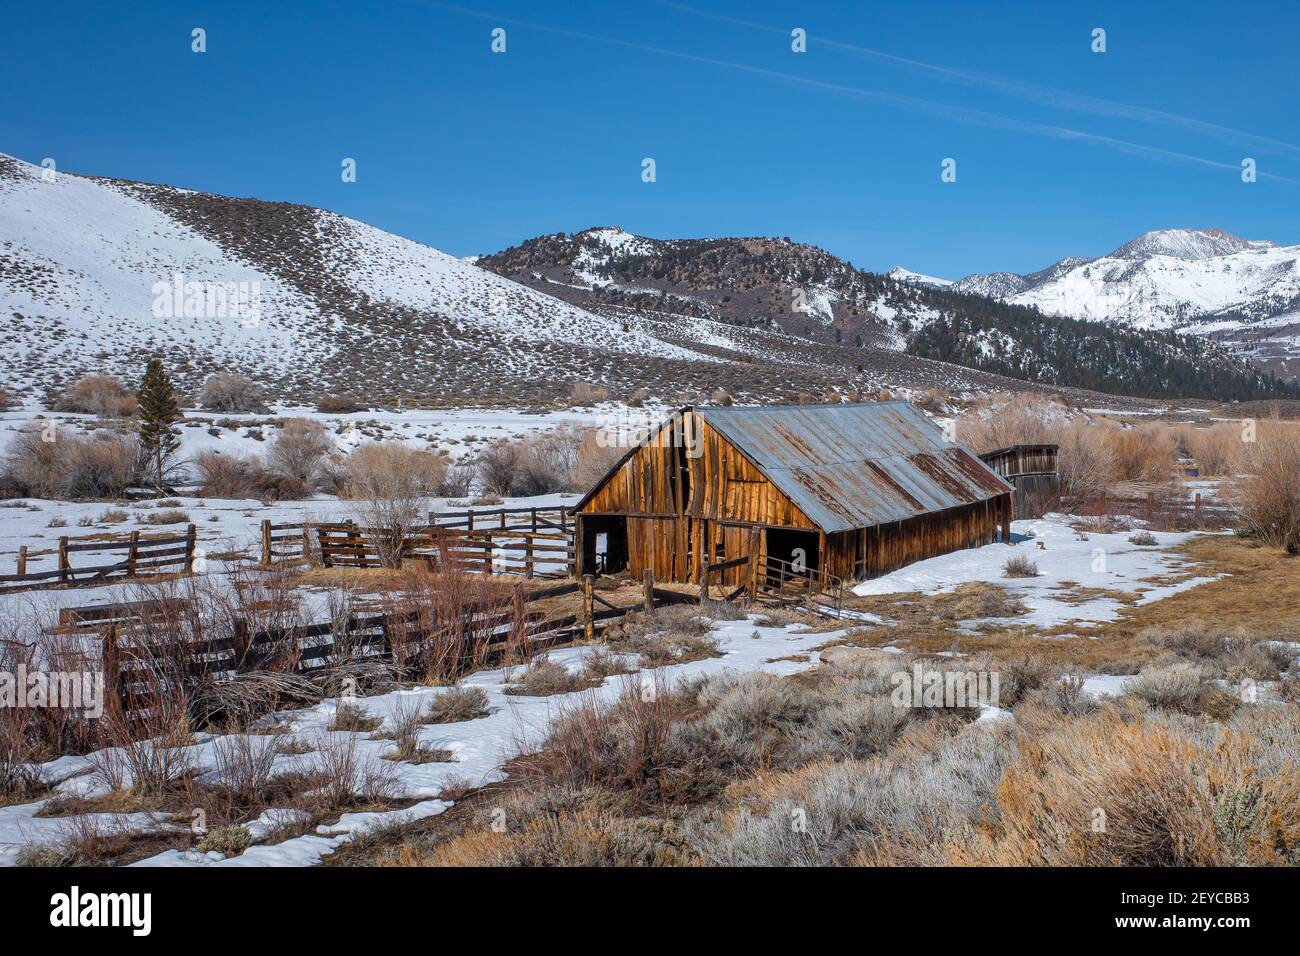 Rustic wooden barn in the Eastern Sierra Nevada mountains during winter. Stock Photo